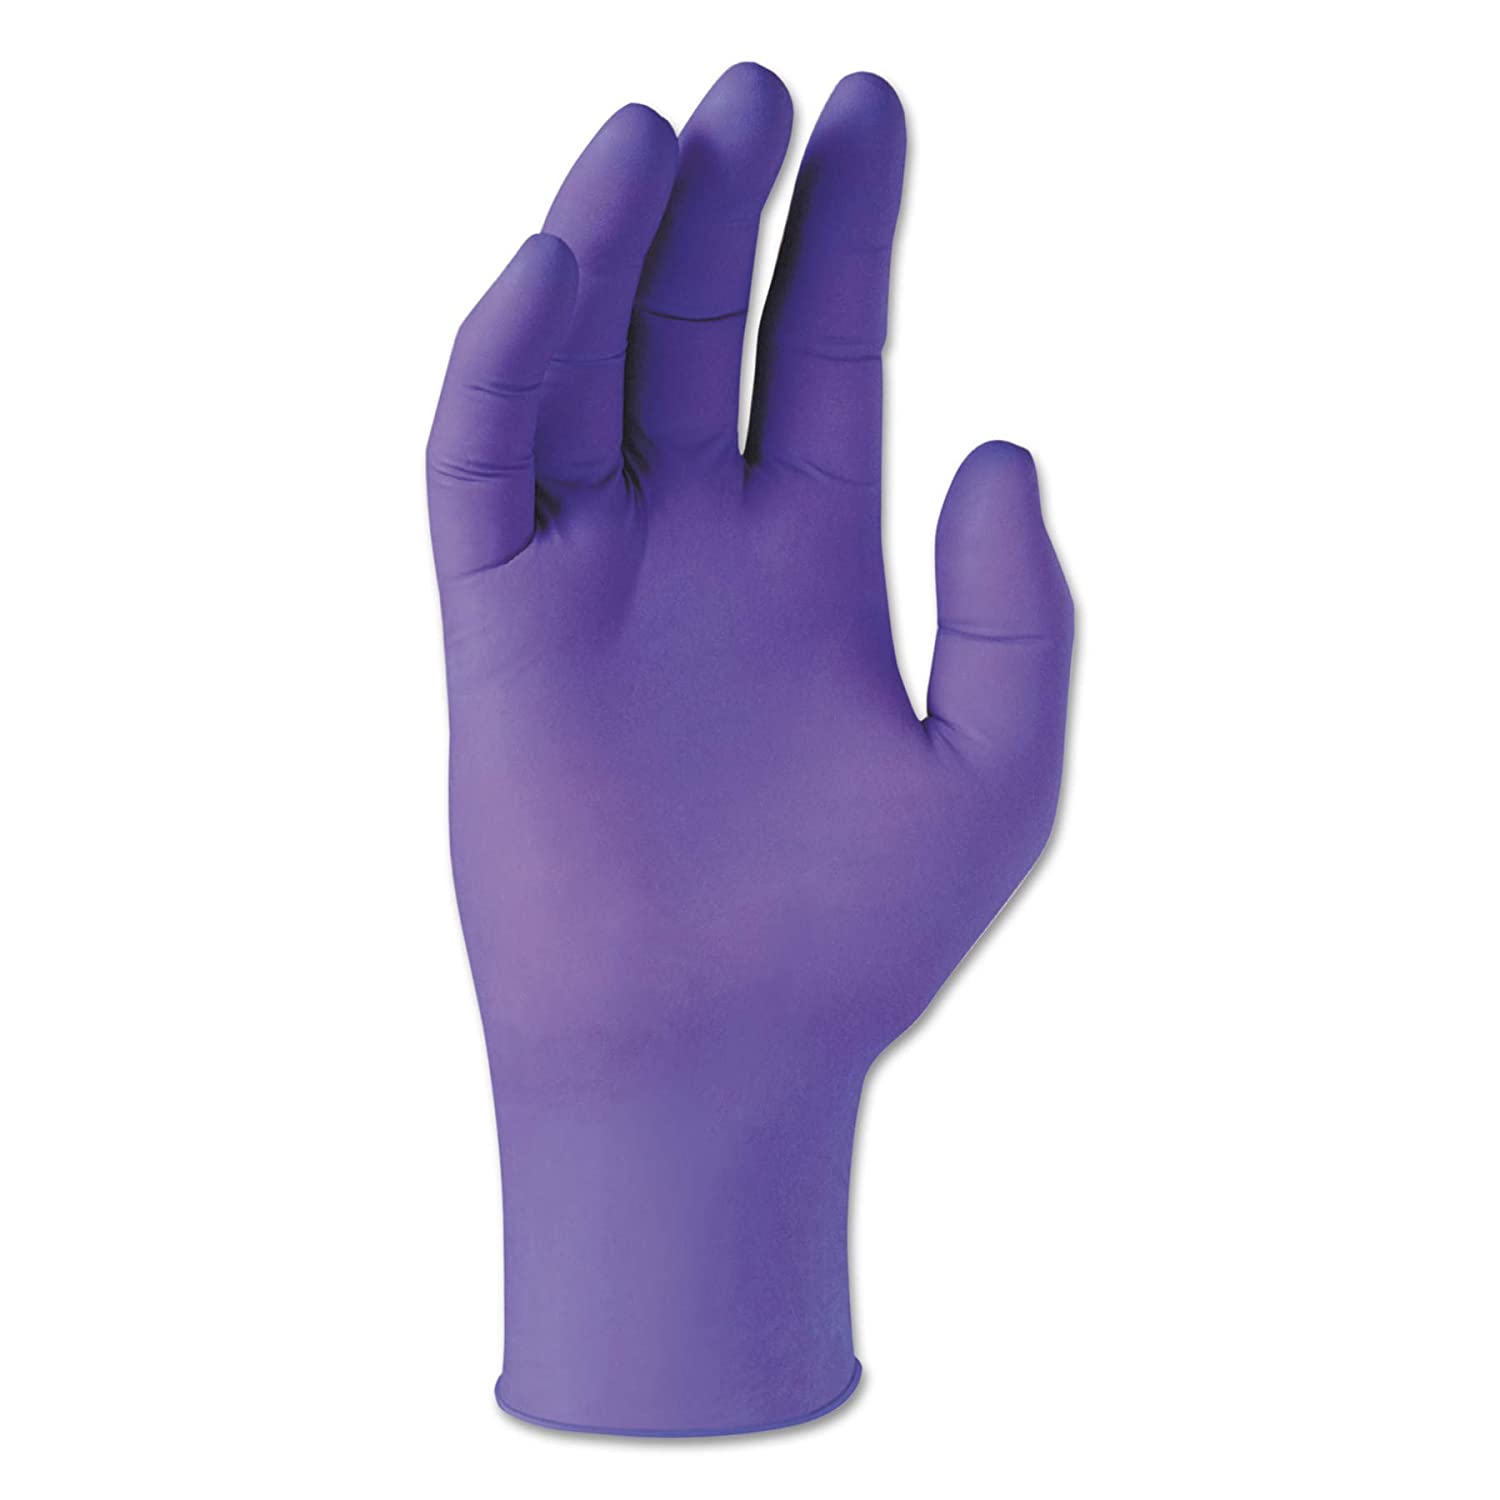 Purple Nitrile Disposable Protective Powder-free Exam Gloves 200 Pack